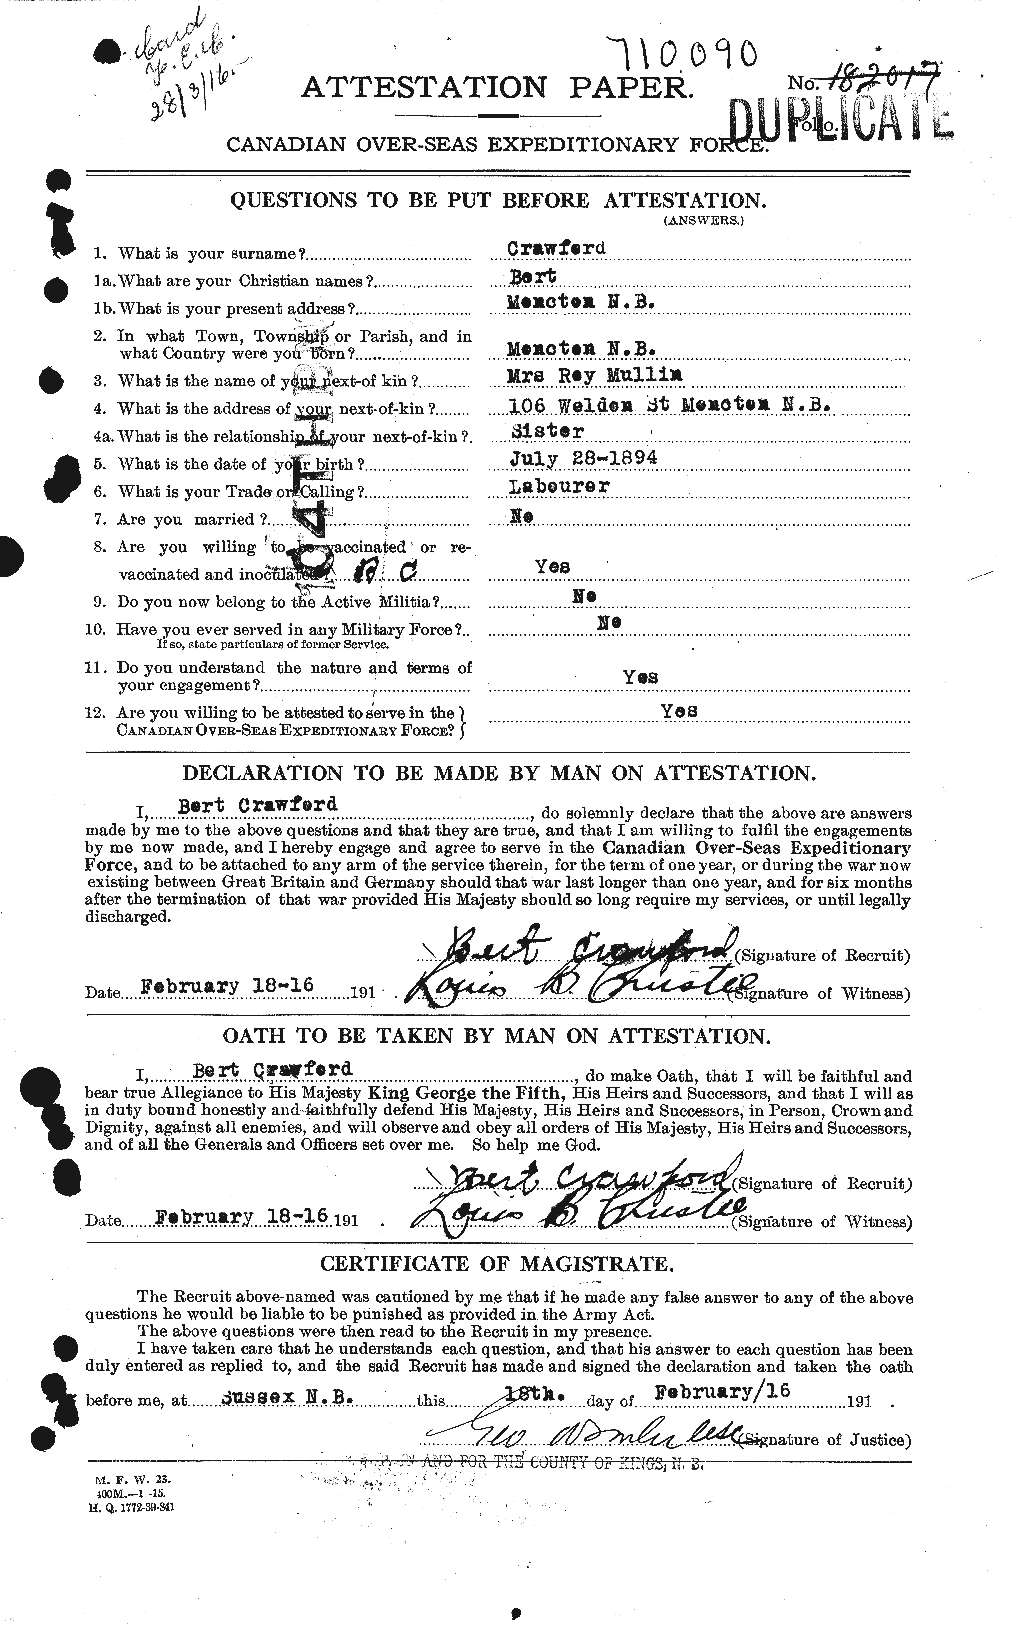 Personnel Records of the First World War - CEF 060919a